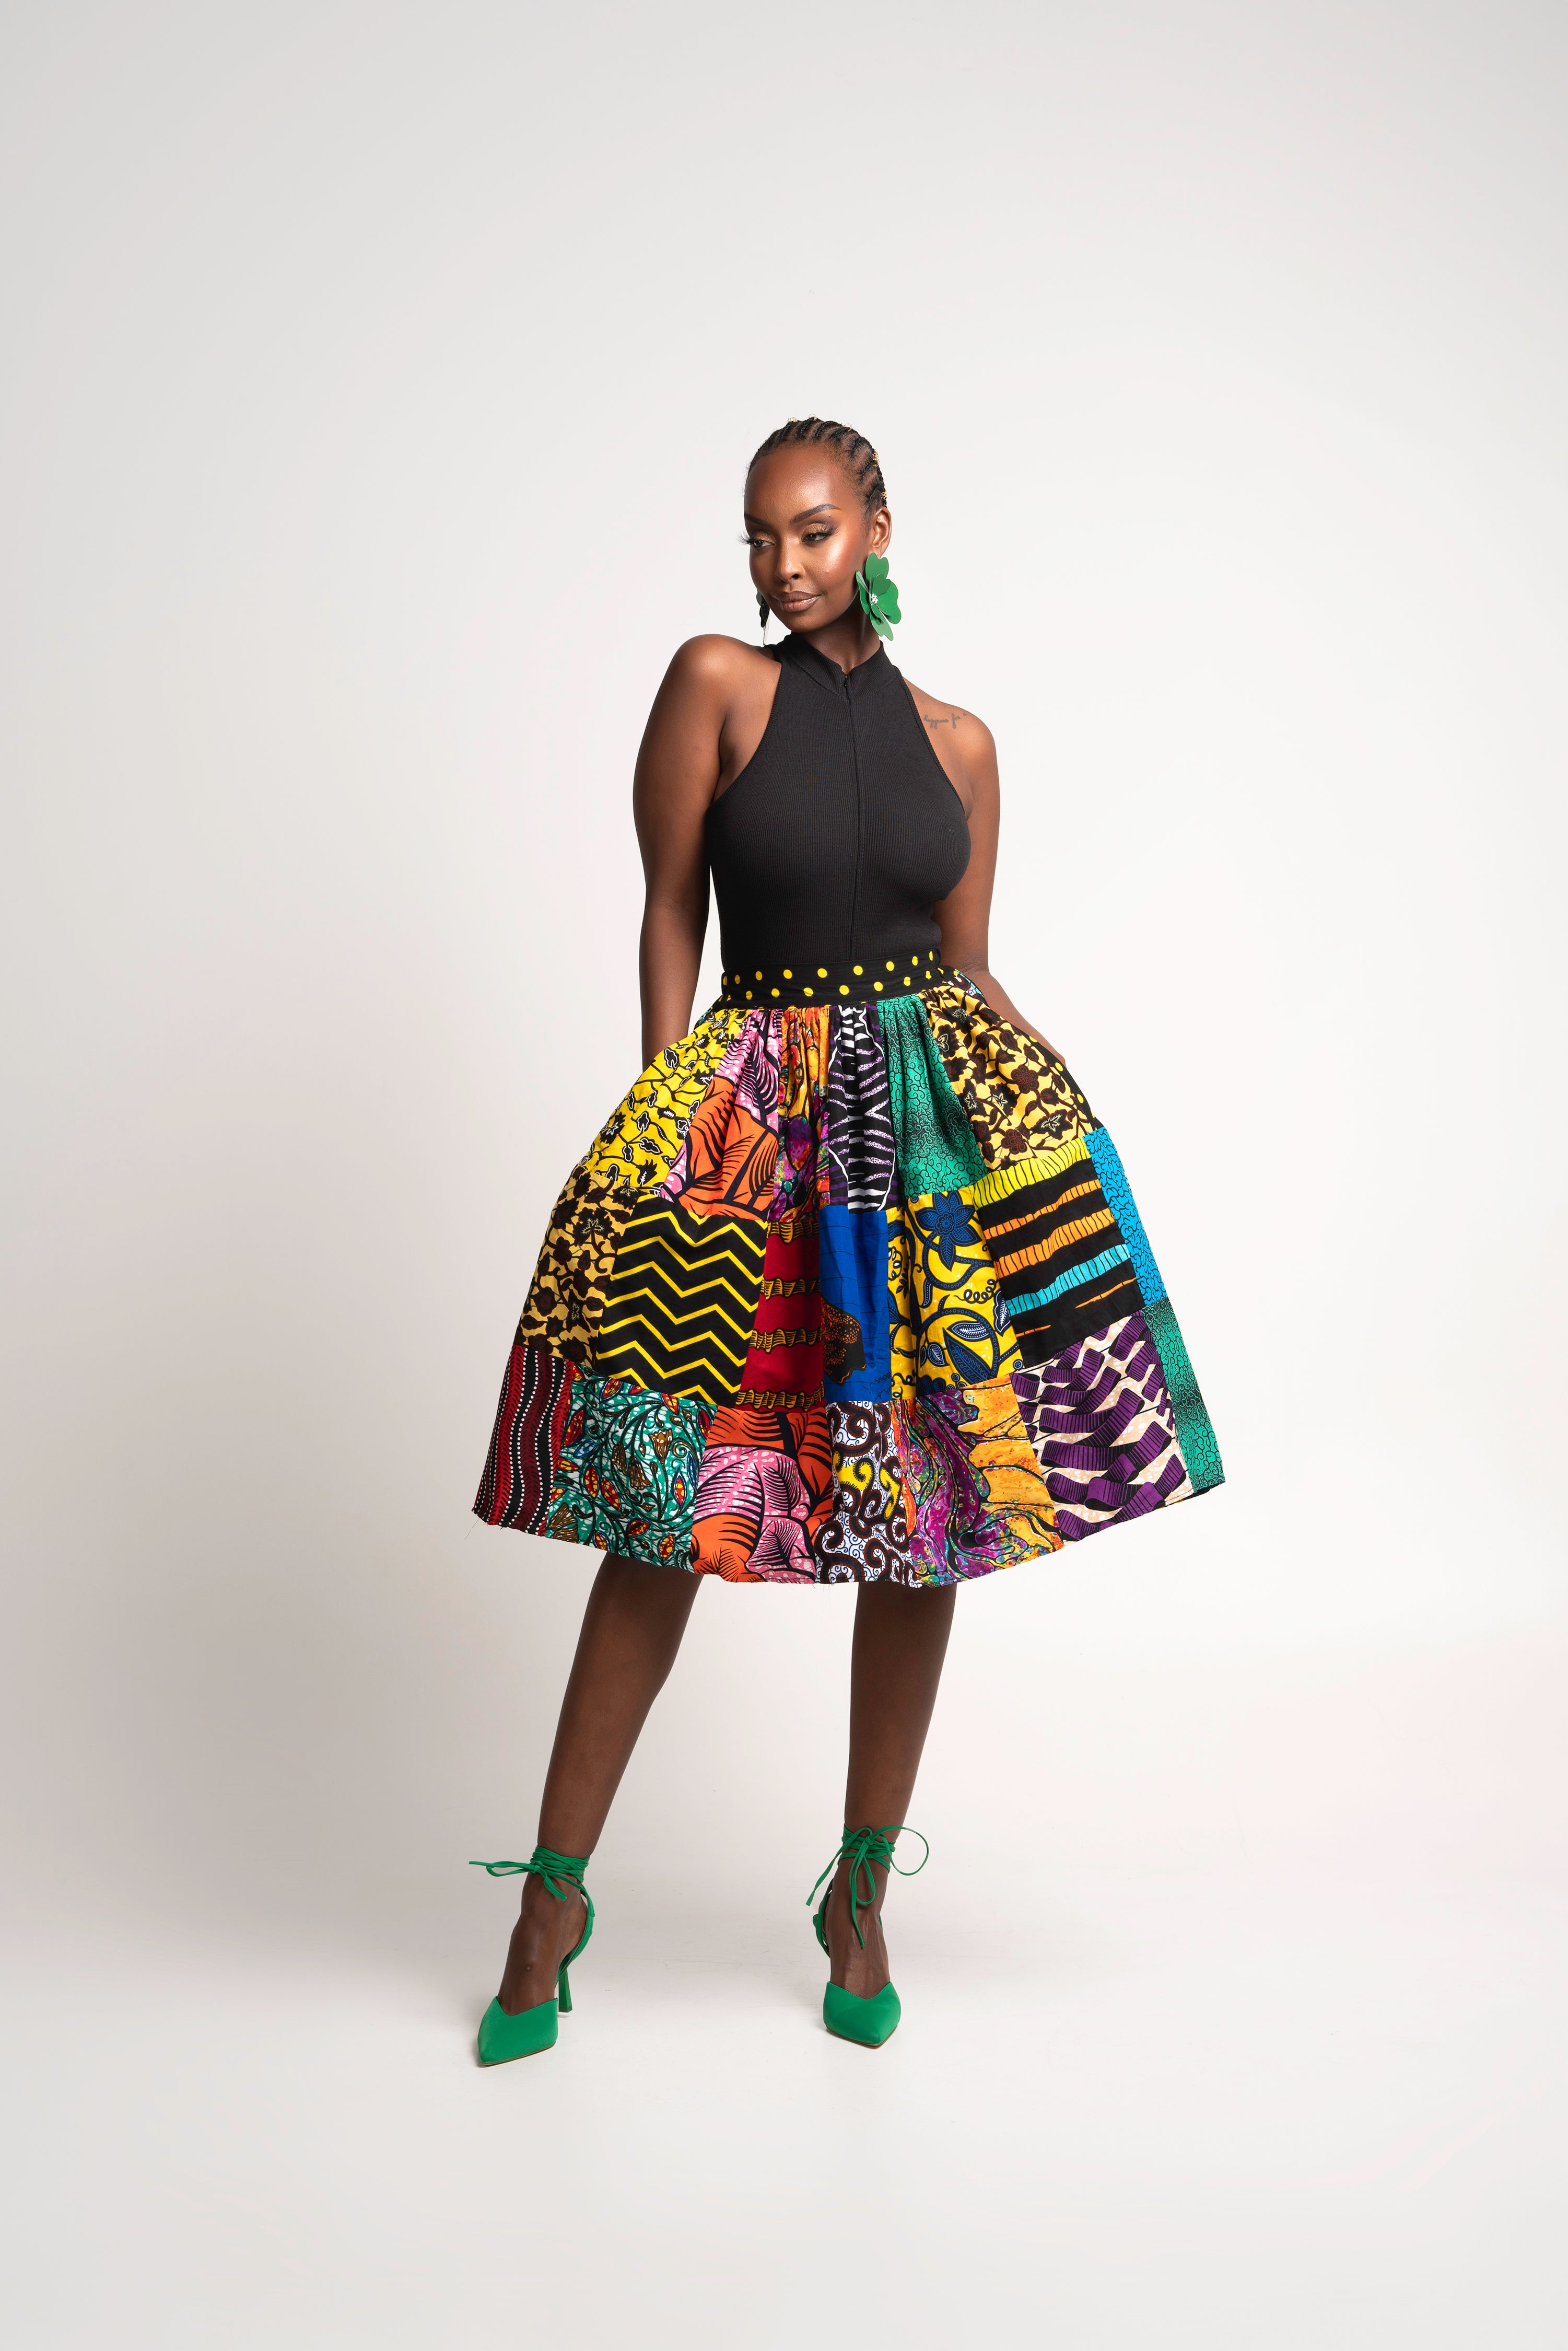 Patchwork flare skirt by lilostitches17 - Mid-length skirts - Afrikrea